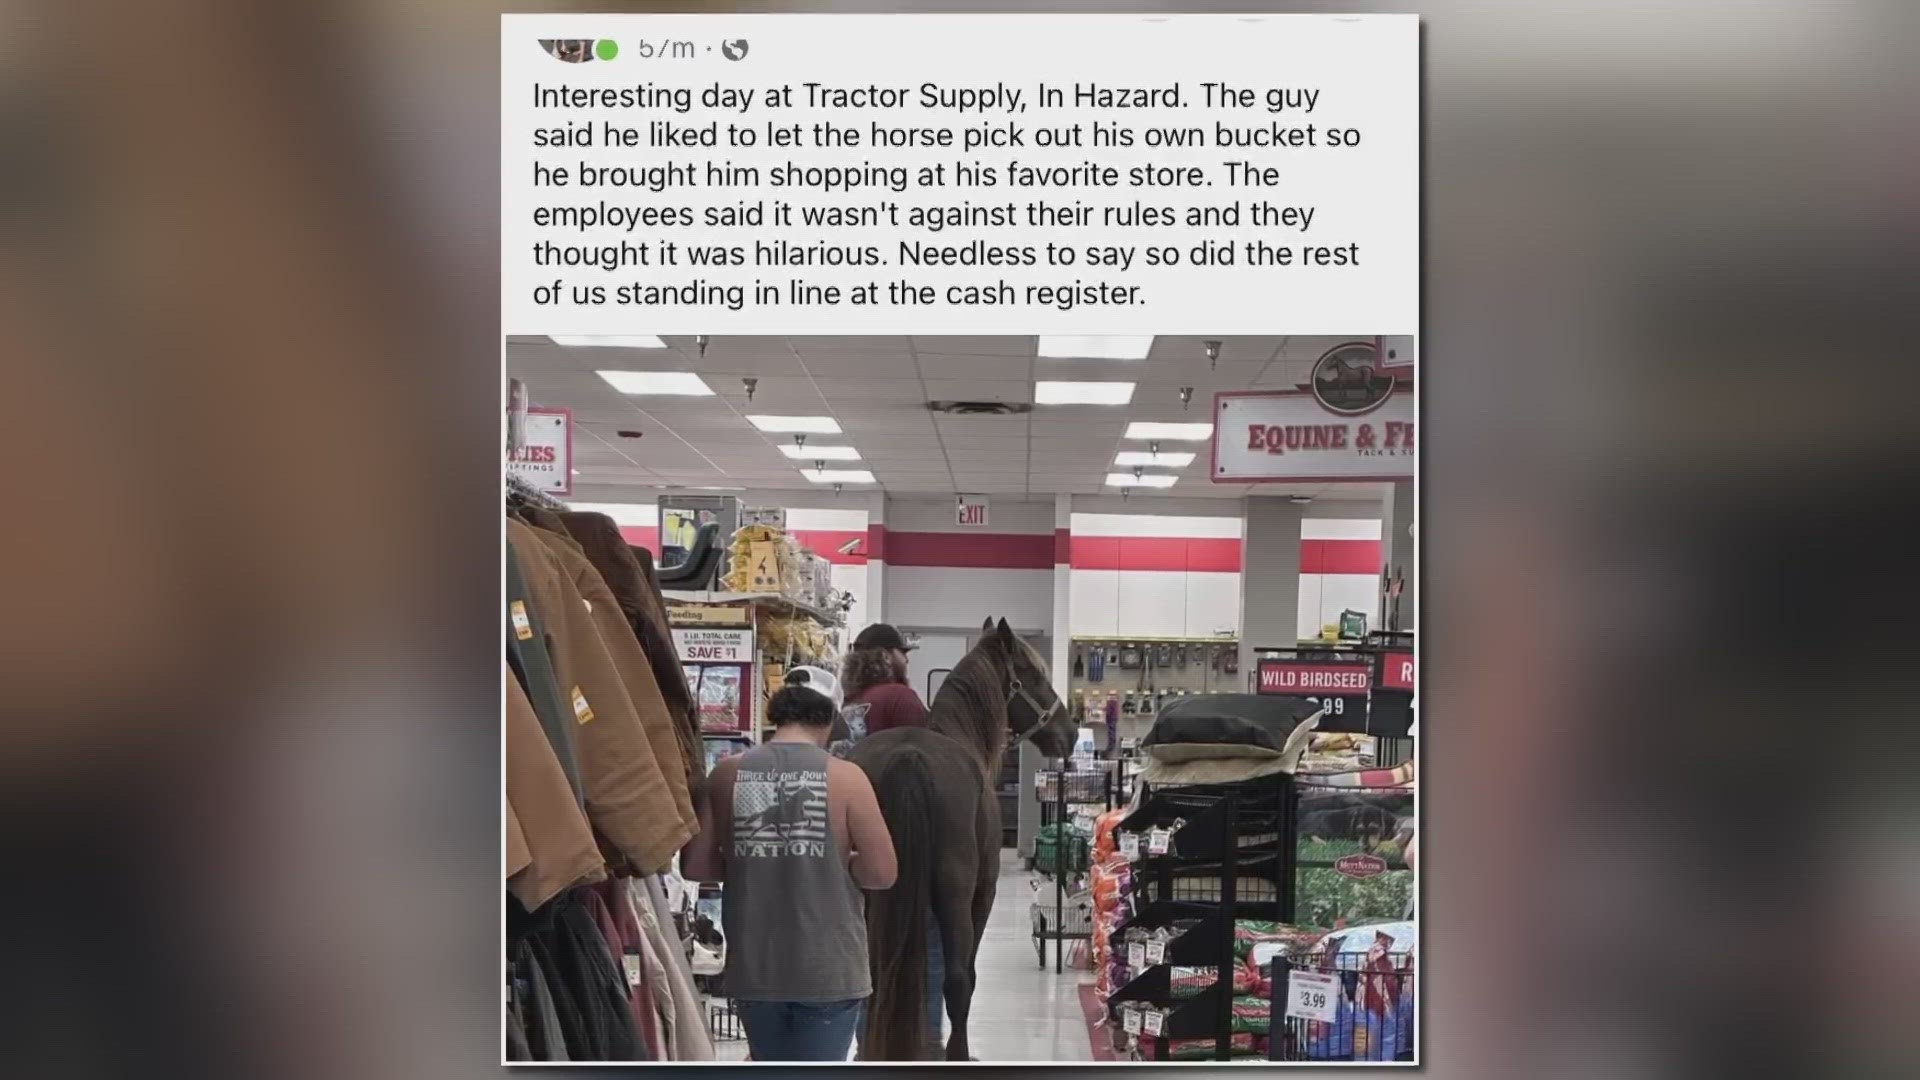 A man brought his horse into a Tractor Supply in Hazard, Kentucky to let him pick out his own bucket.